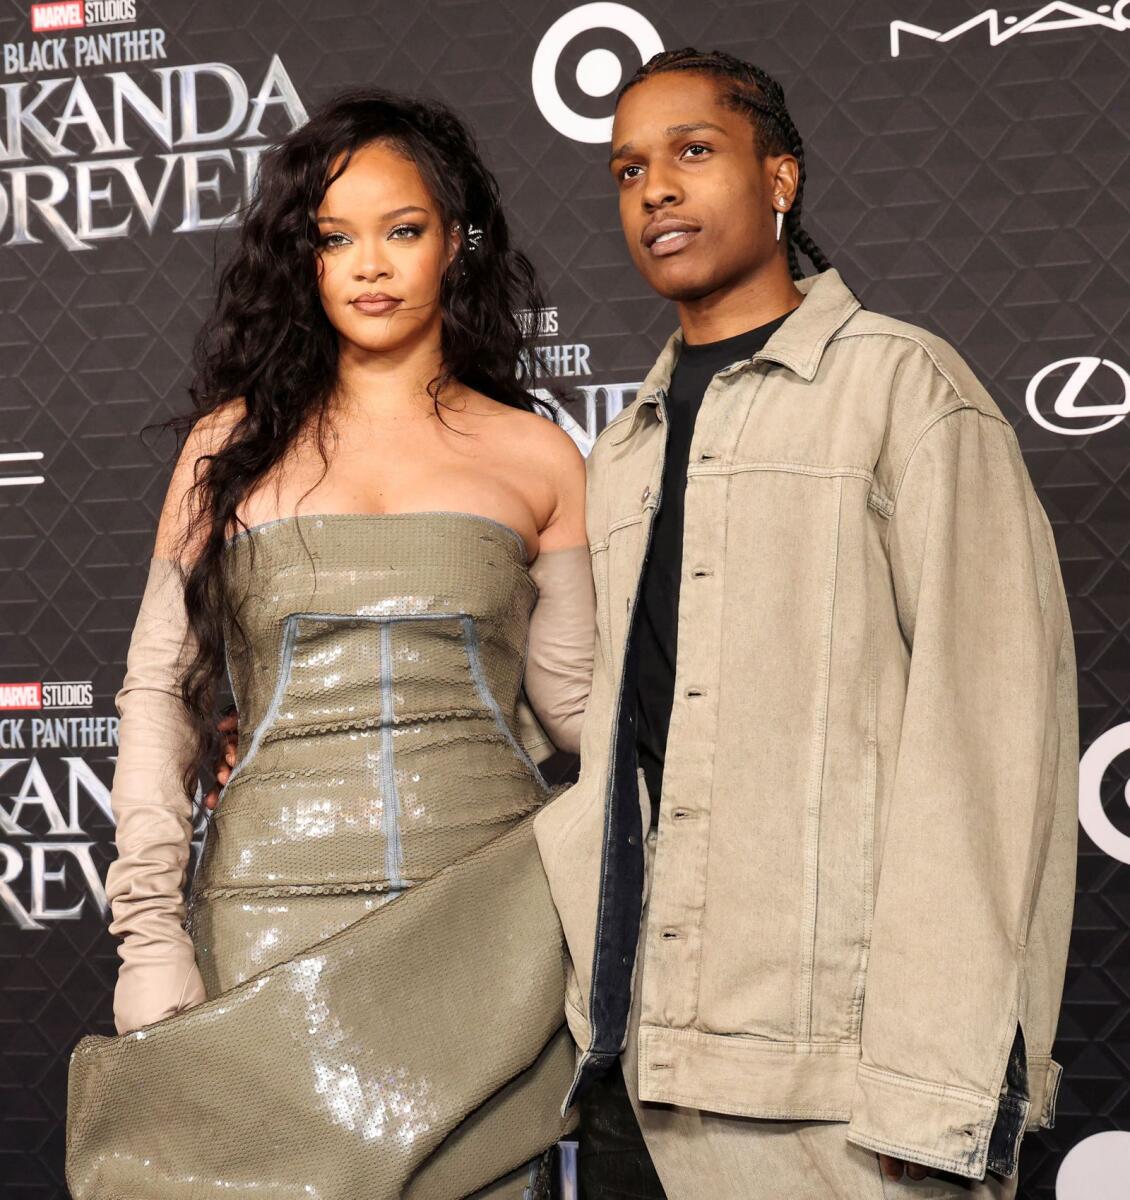 Singer Rihanna and rapper A$AP Rocky attend a premiere for the film Black Panther: Wakanda Forever in Los Angeles, California, U.S., October 26, 2022.